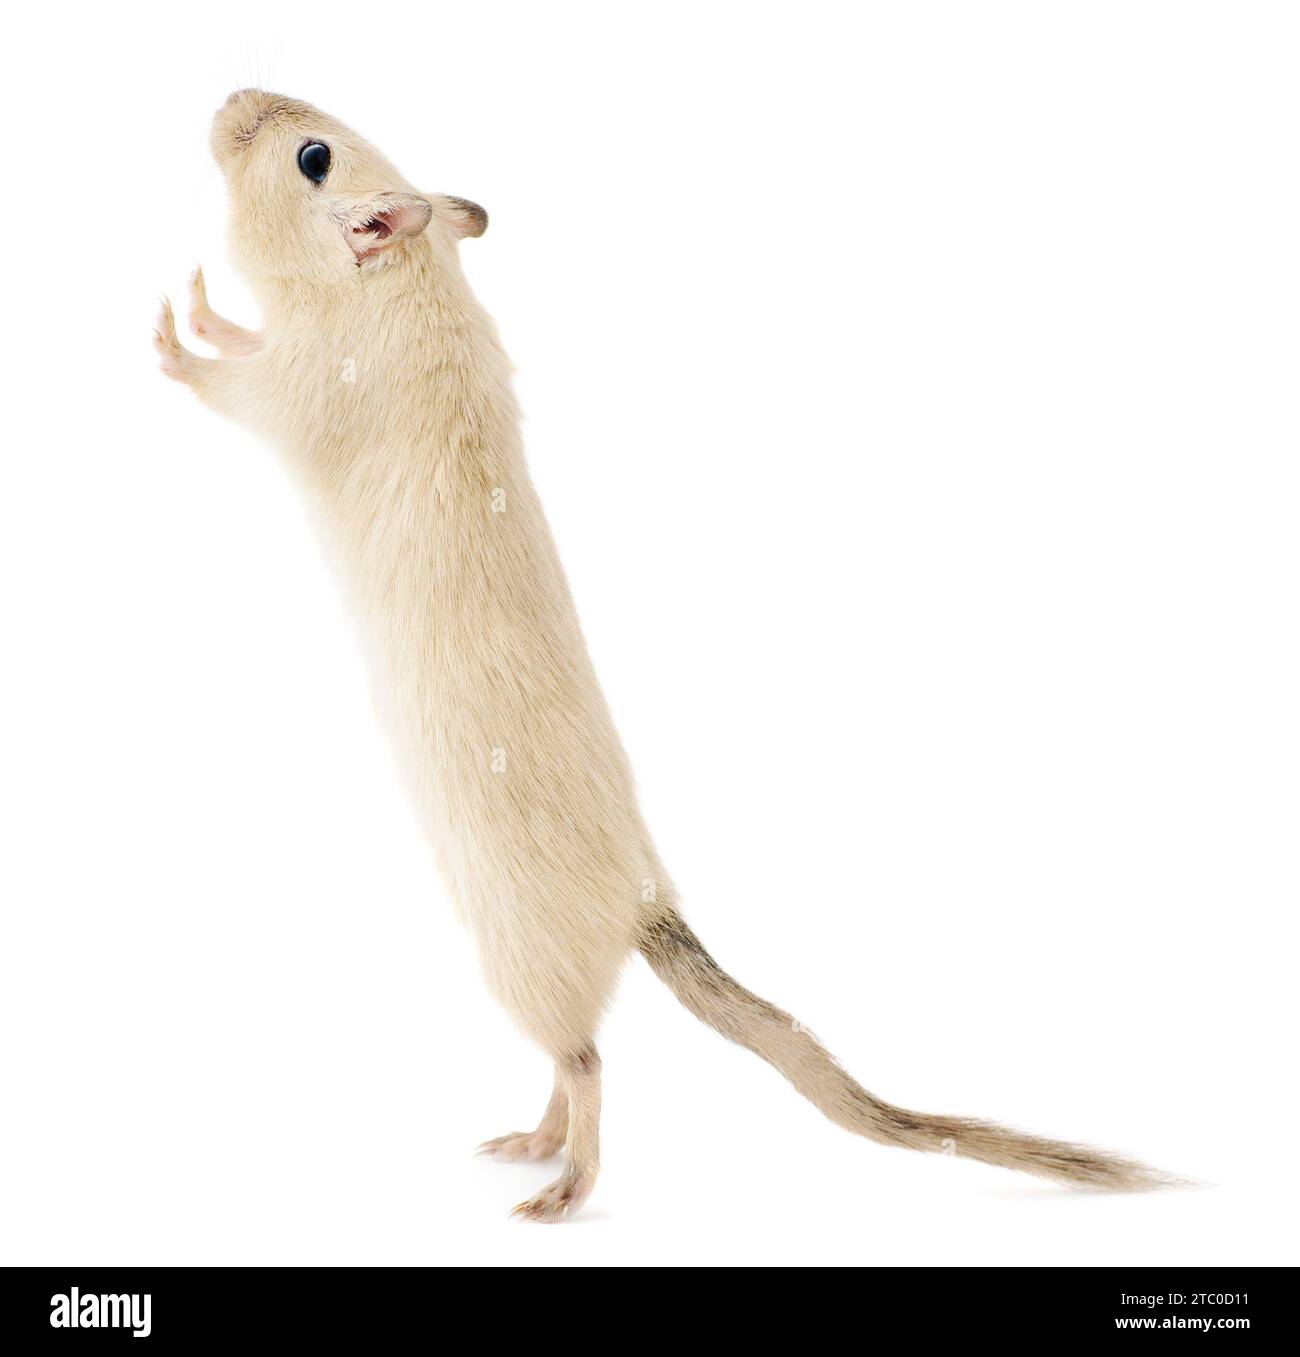 Beige pet gerbil standing upright on its hind legs looking up with curious expression, isolated on white background Stock Photo